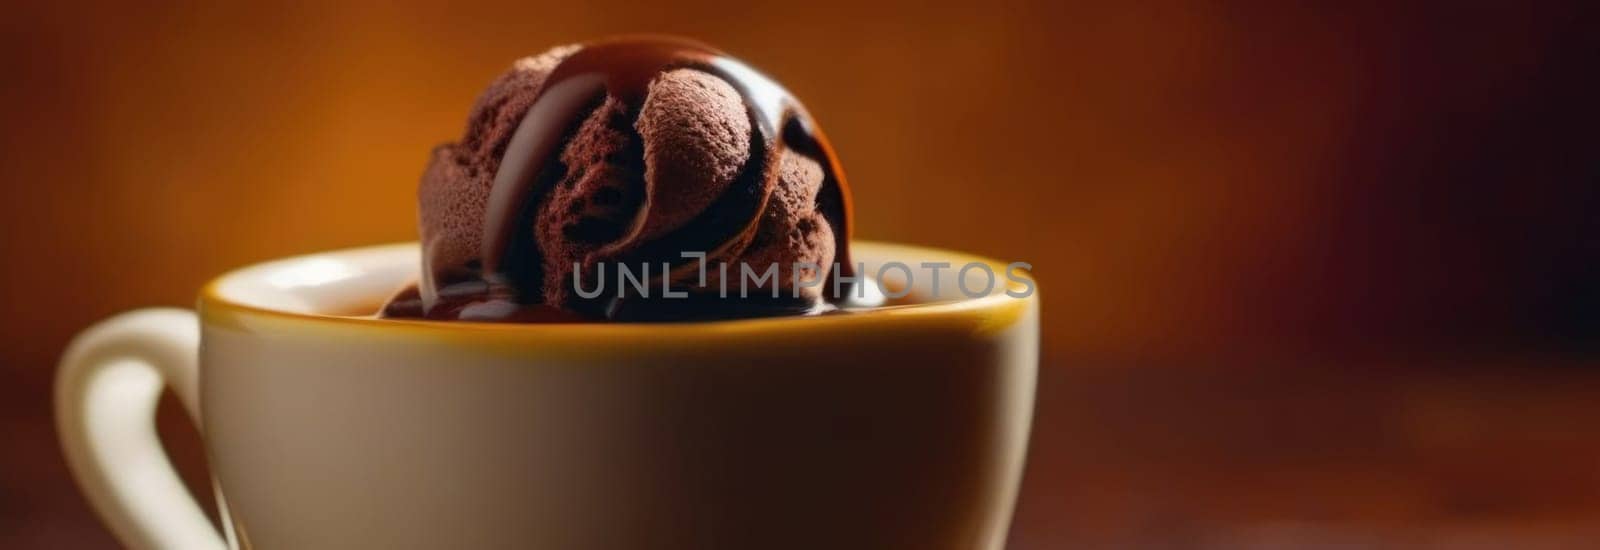 Combines elements of coffee cup, ice cream, chocolate creating visually appealing luxurious image against dark backdrop. For advertising, banner, menu, dessert, cafe themed content. Copy space